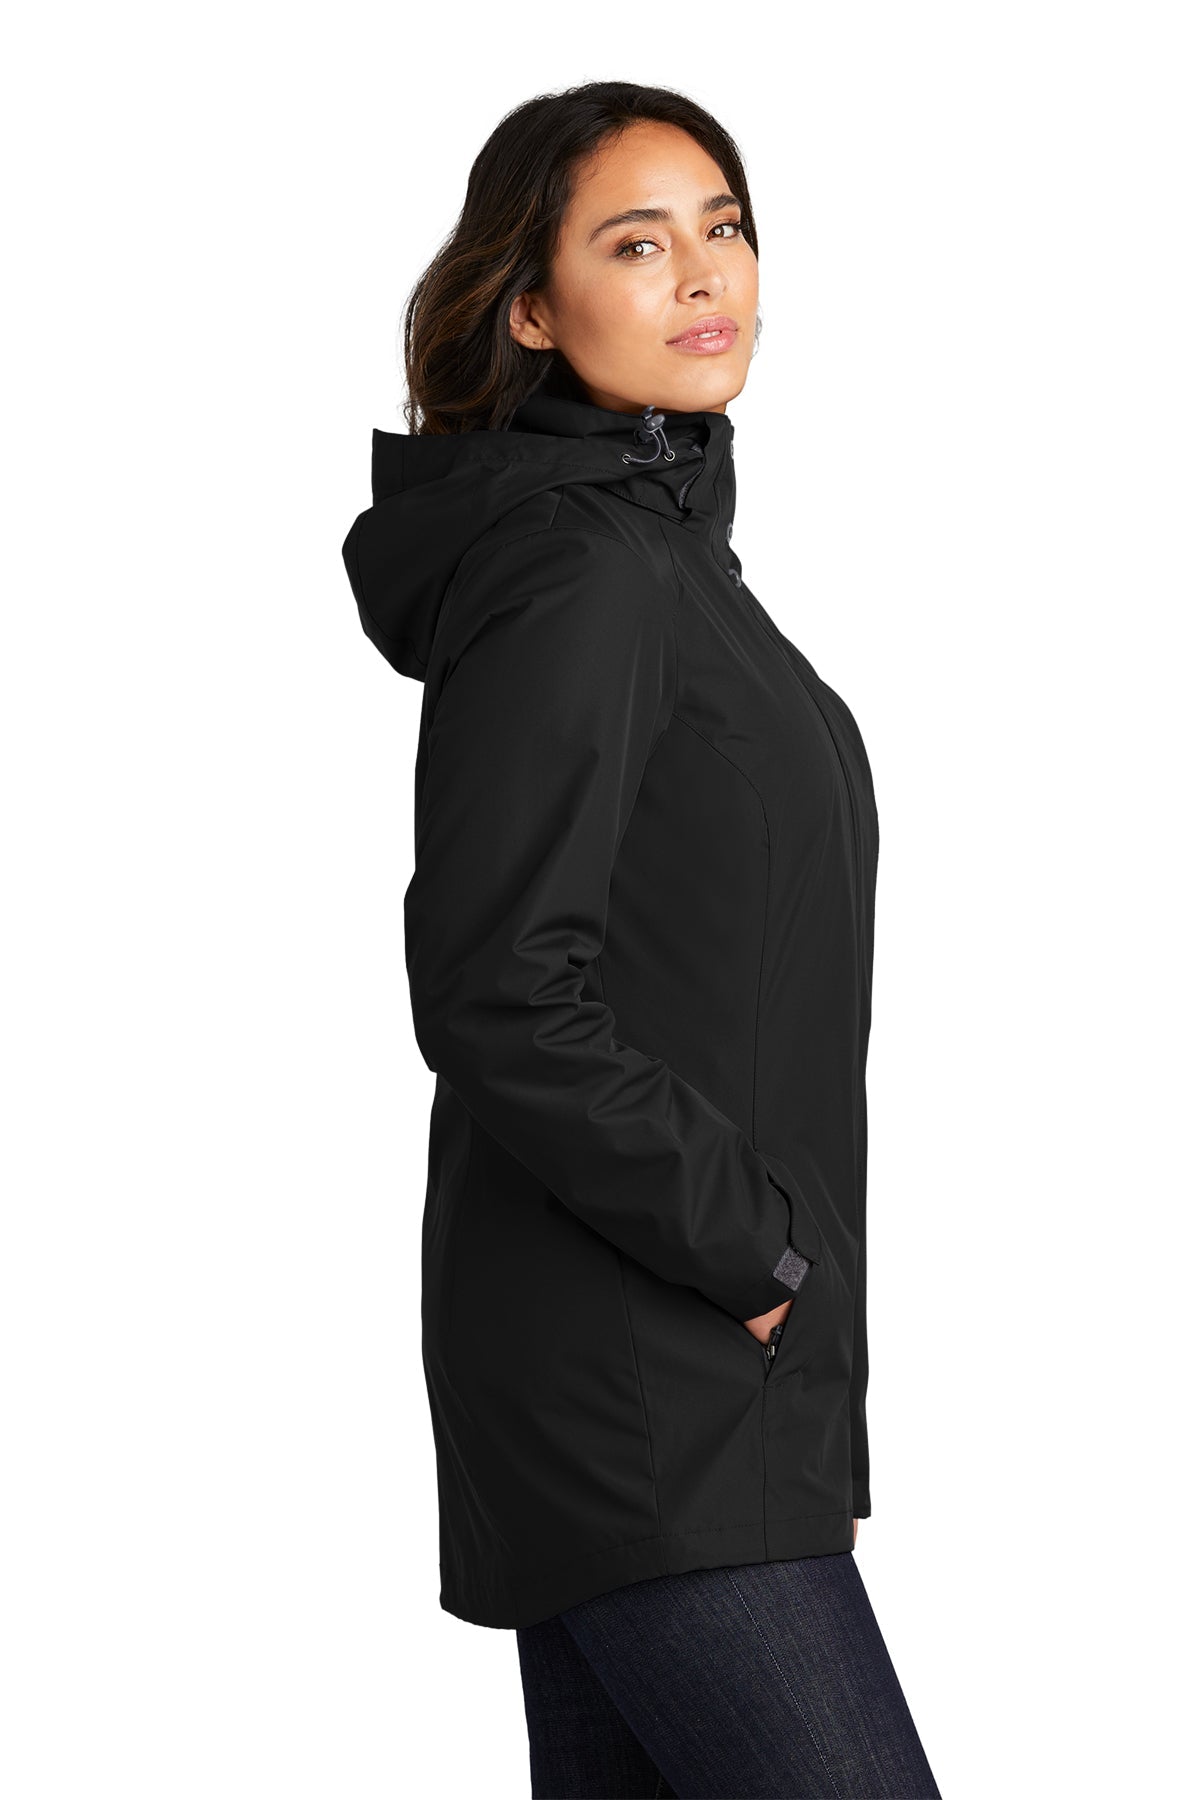 Port Authority Ladies All-Weather 3-in-1 Branded Jackets, Black